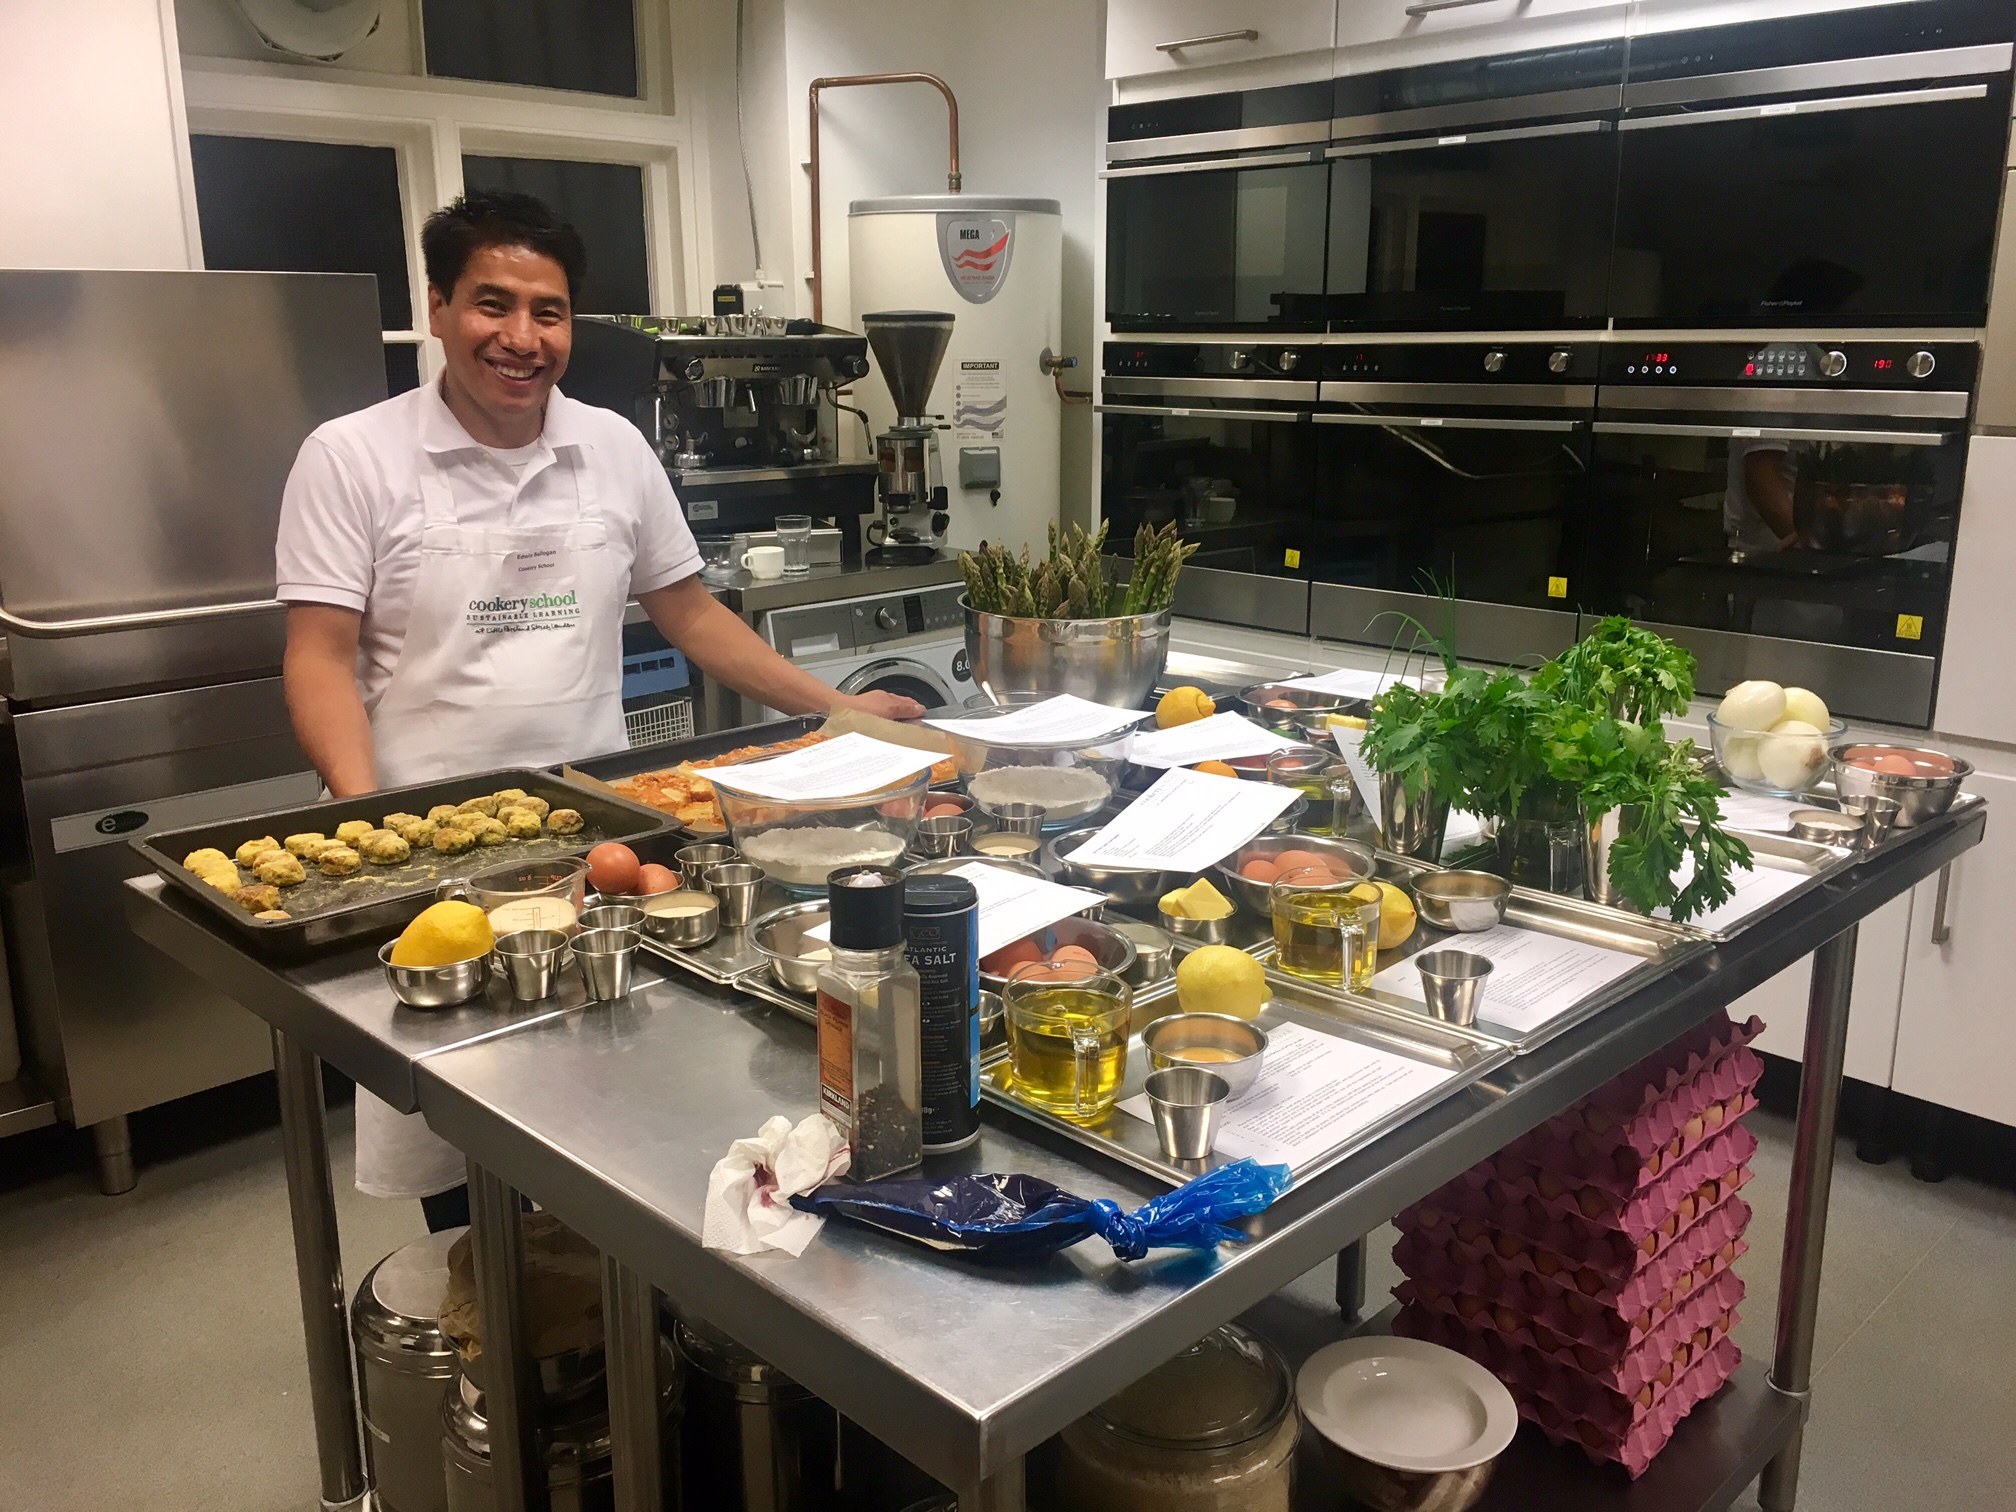 Our back of house superstar, Edwin, with all the prepped recipes and ingredients